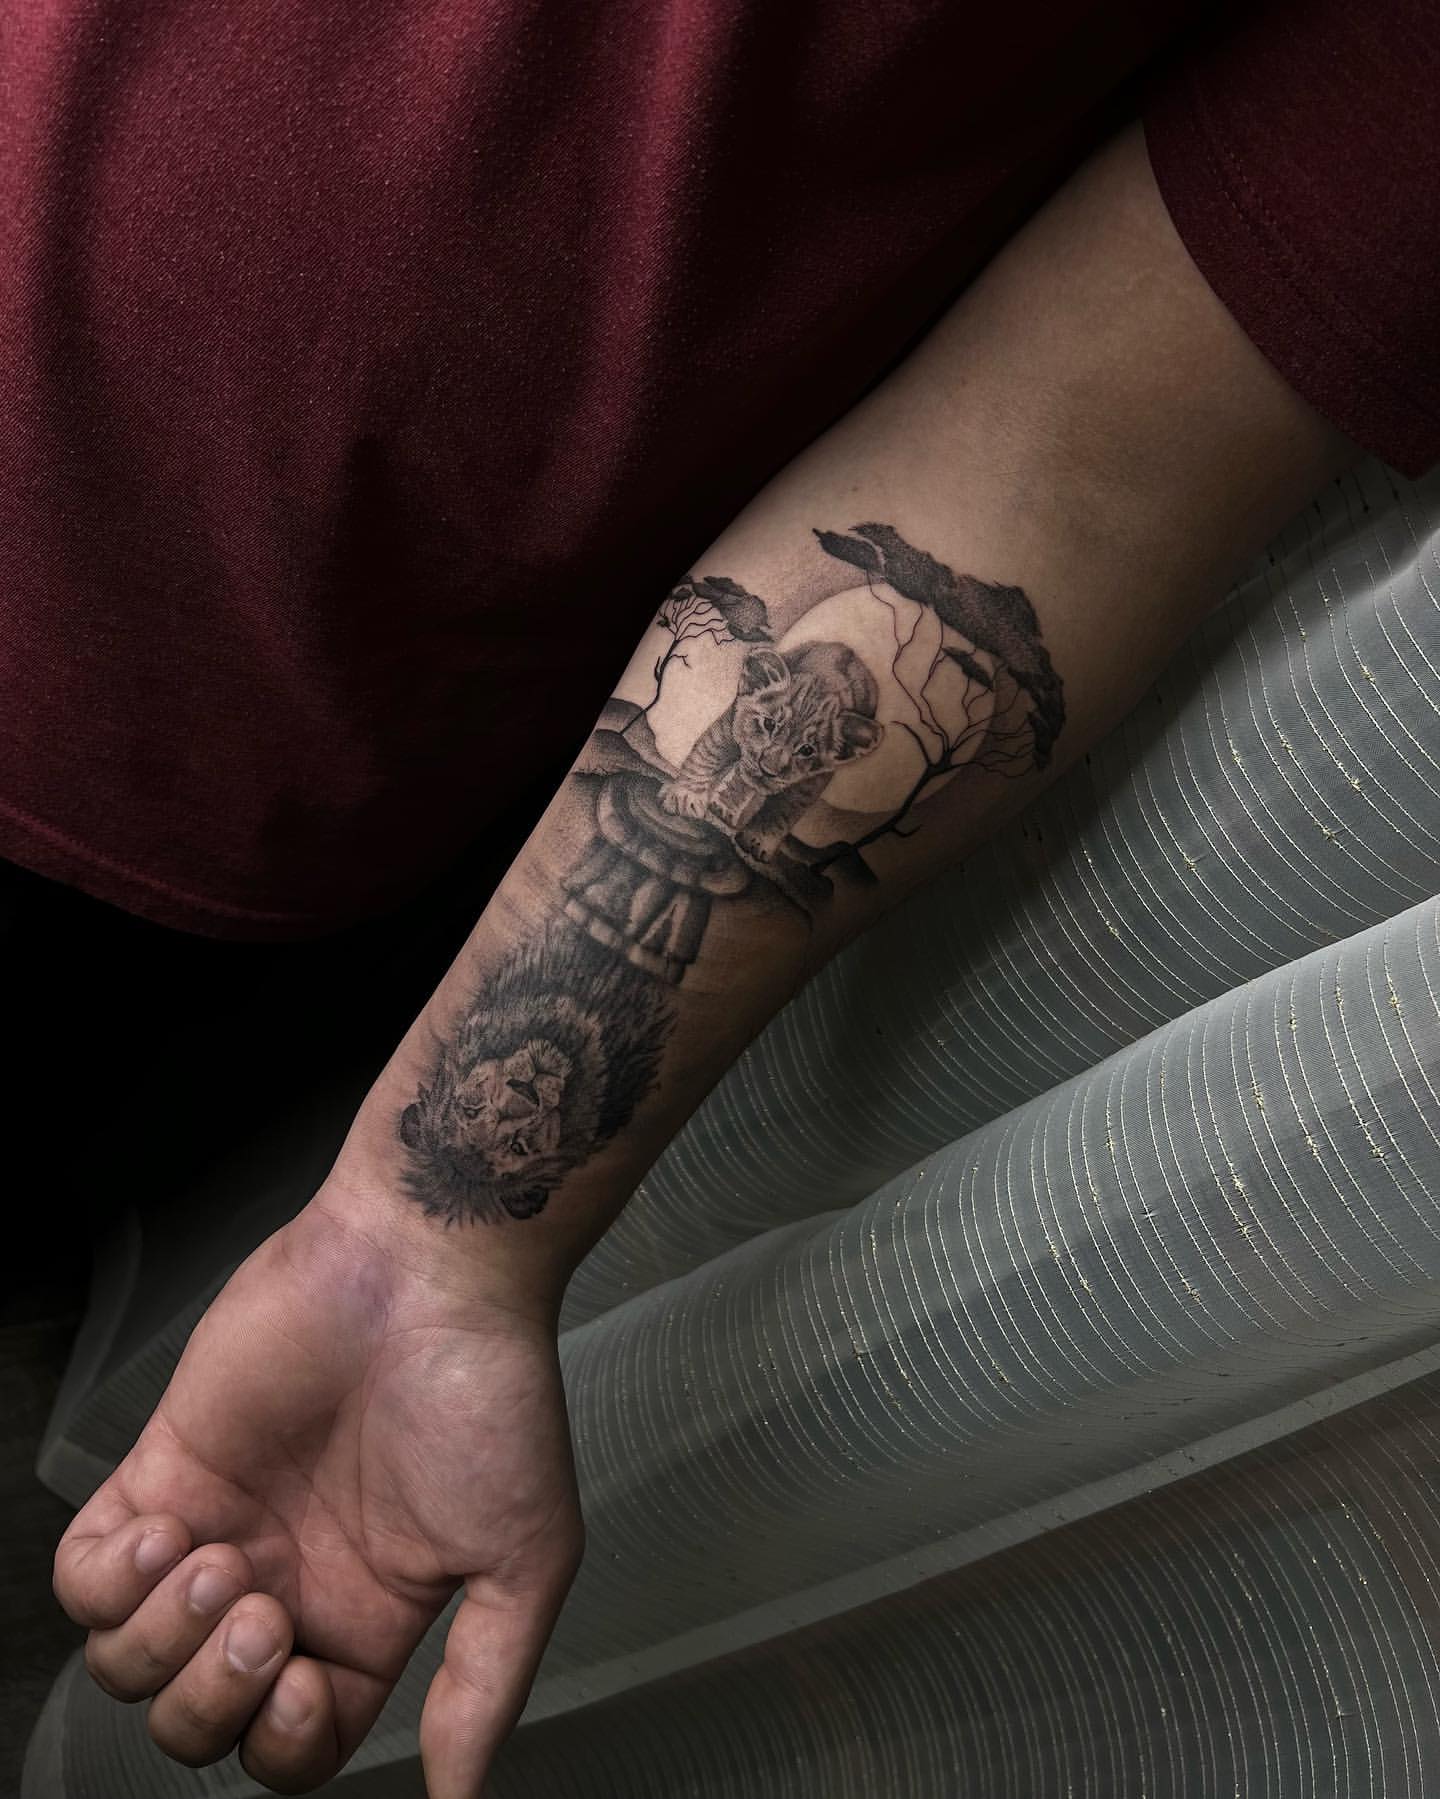 How many Americans have tattoos, why, and do they regret it? | Pew Research  Center